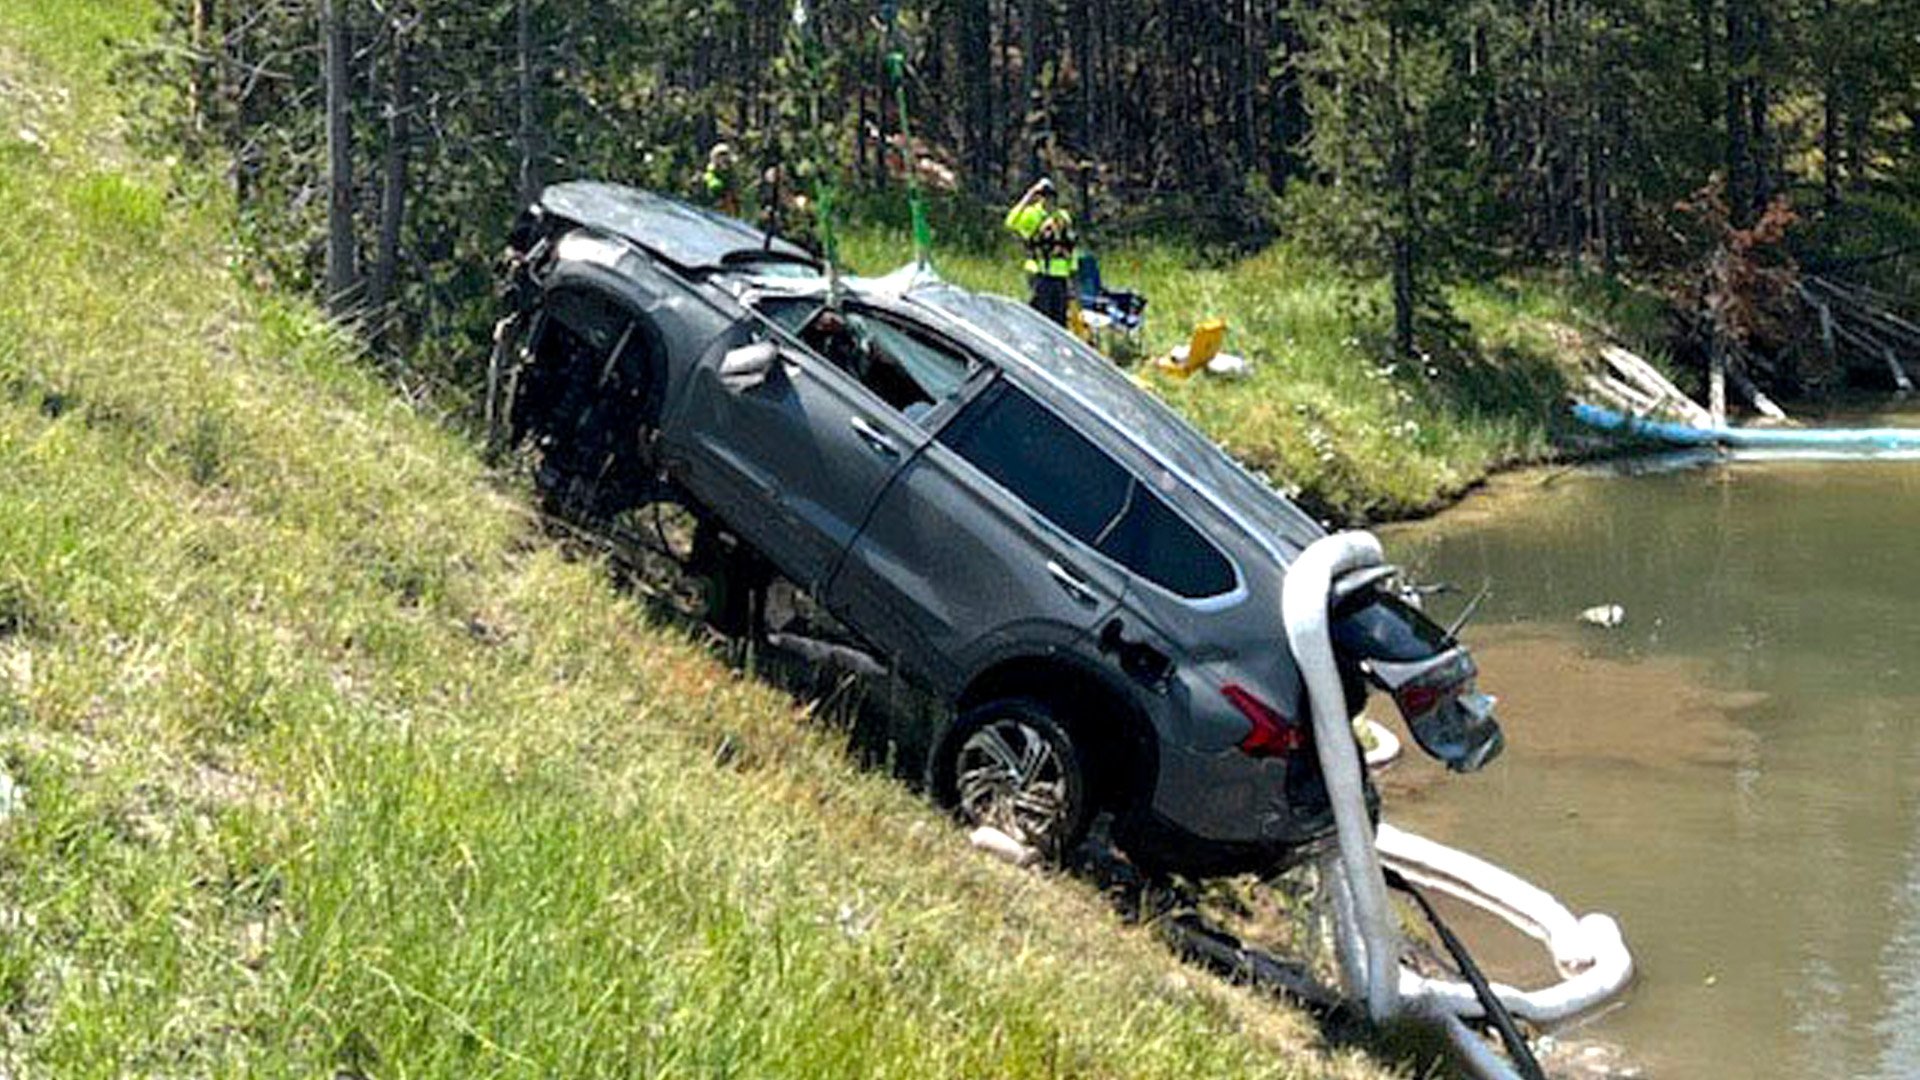 5 hospitalized after car plunges into hot, acidic geyser in Yellowstone...